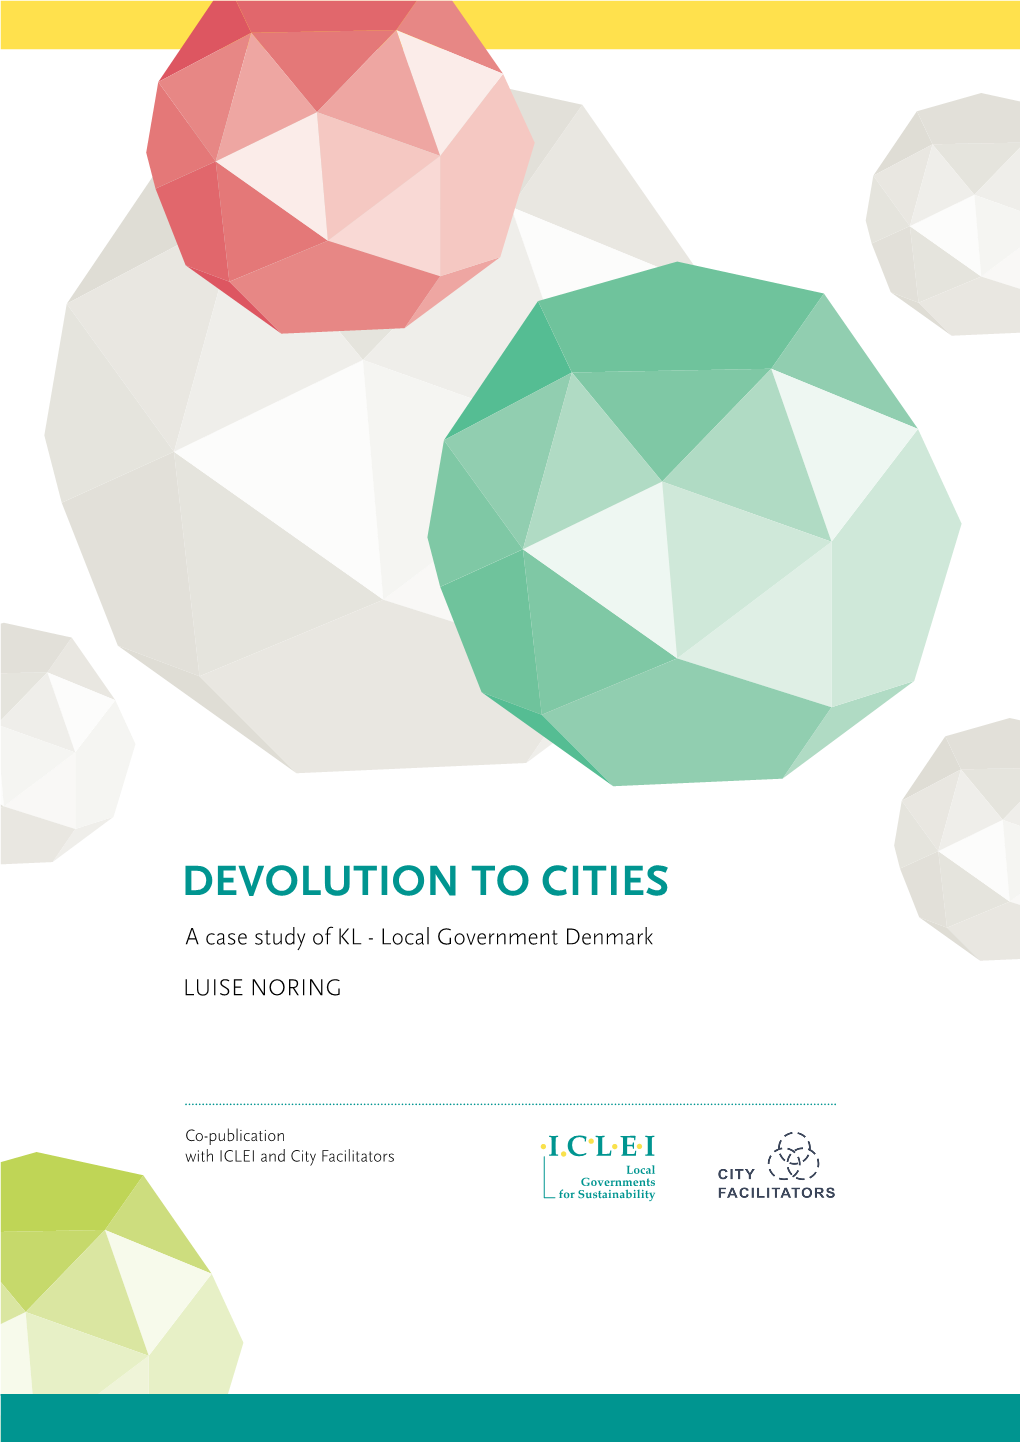 DEVOLUTION to CITIES a Case Study of KL - Local Government Denmark